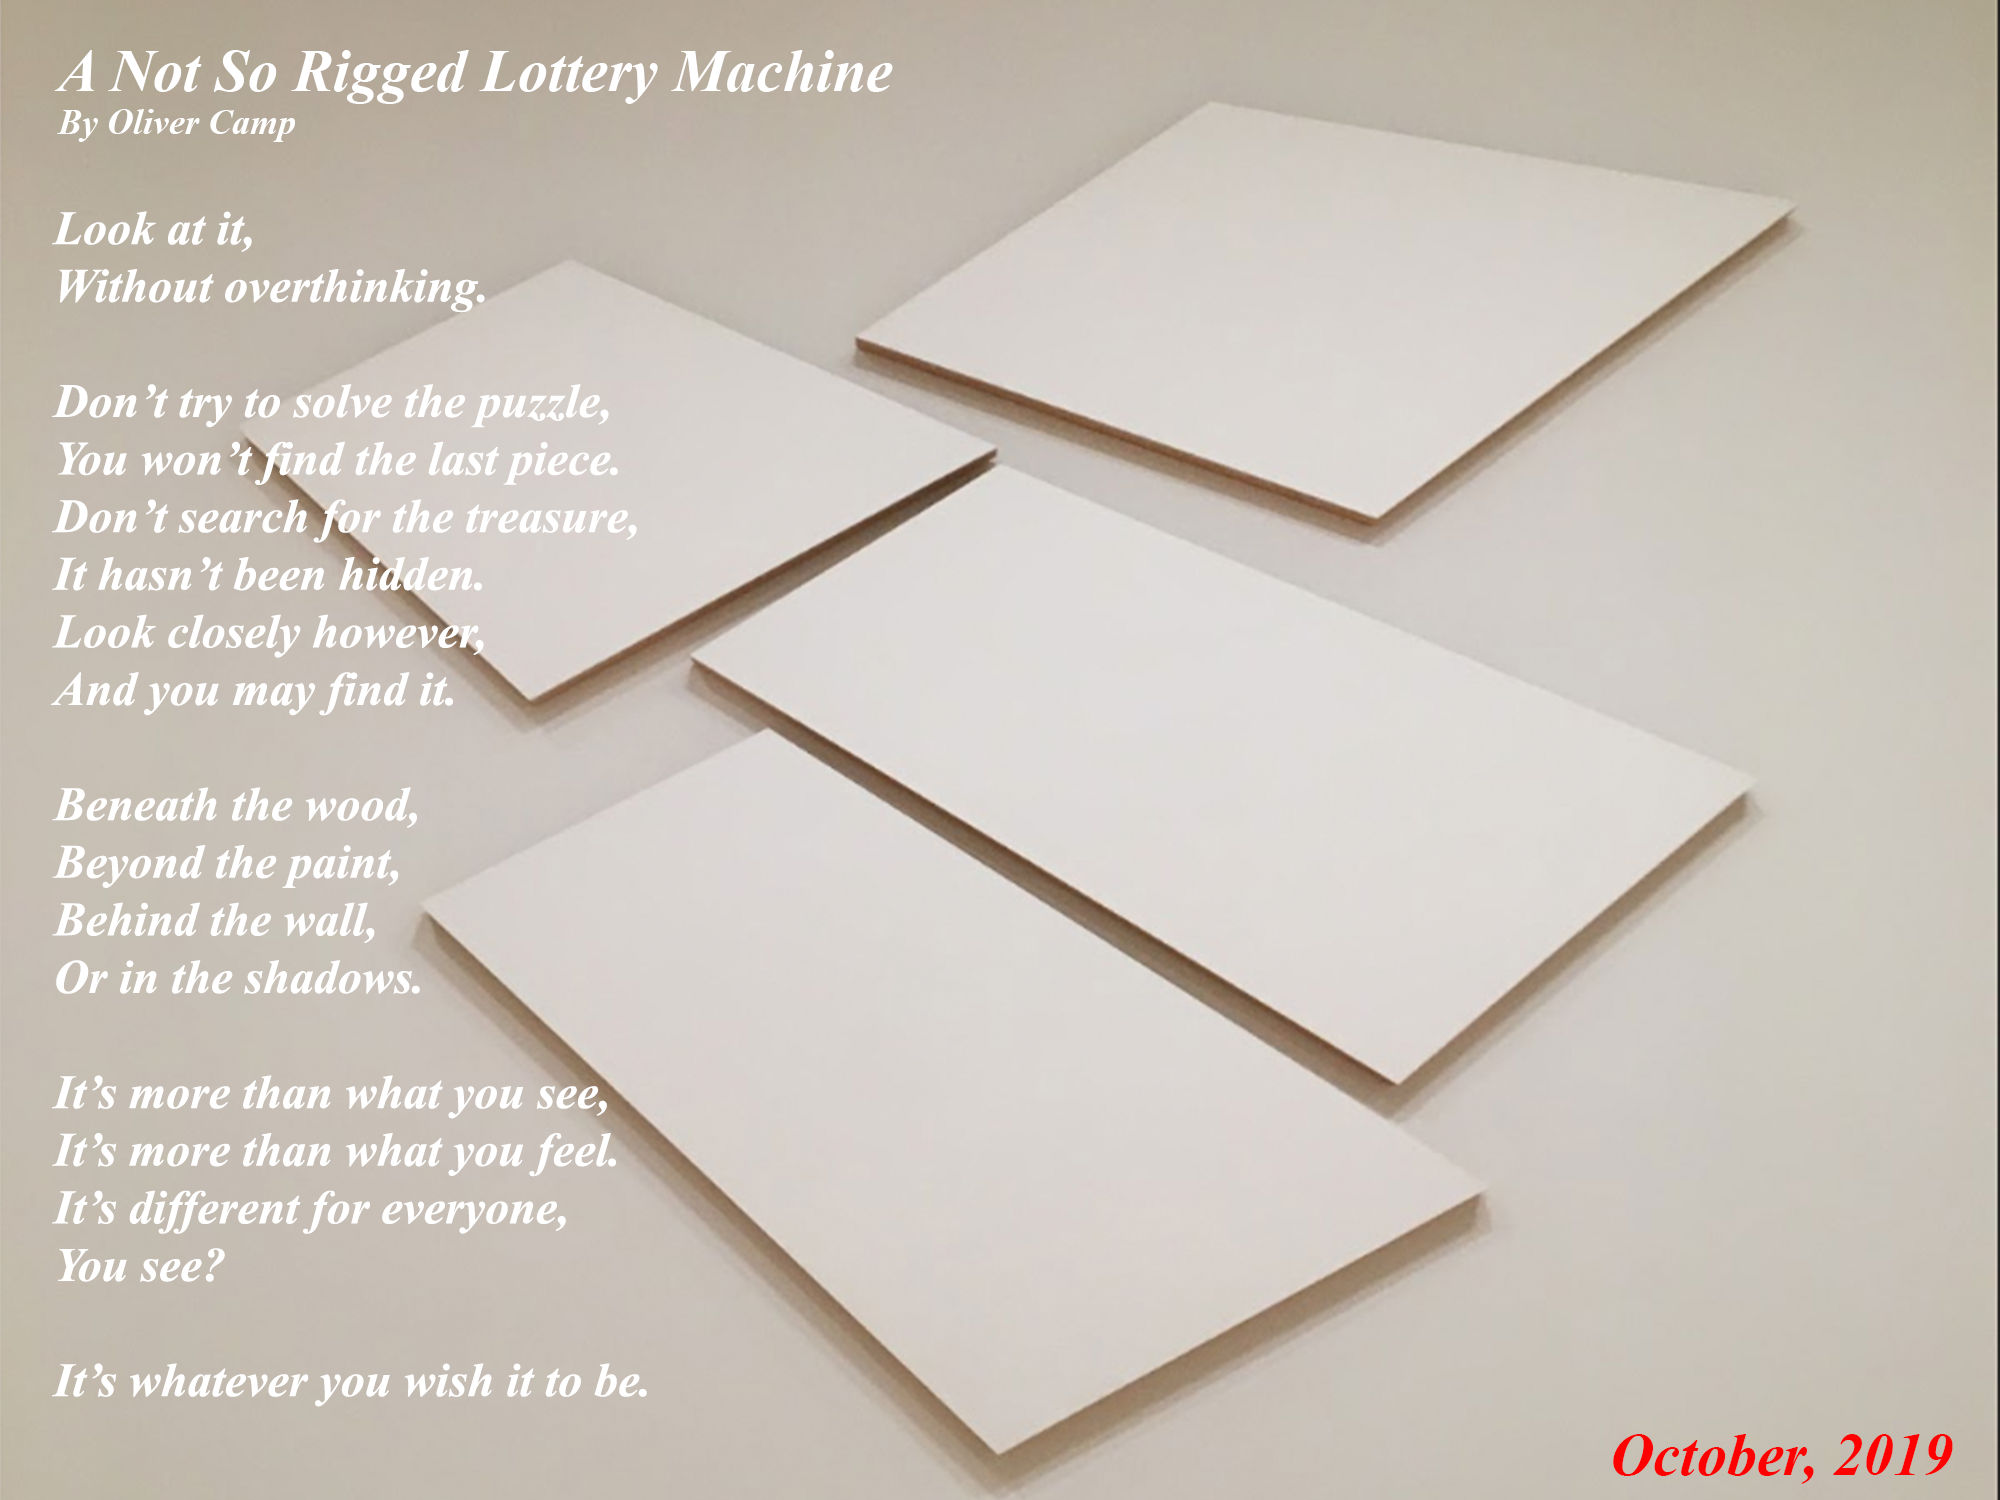 Poem by Oliver Camp A Not So Rigged Lottery Machine